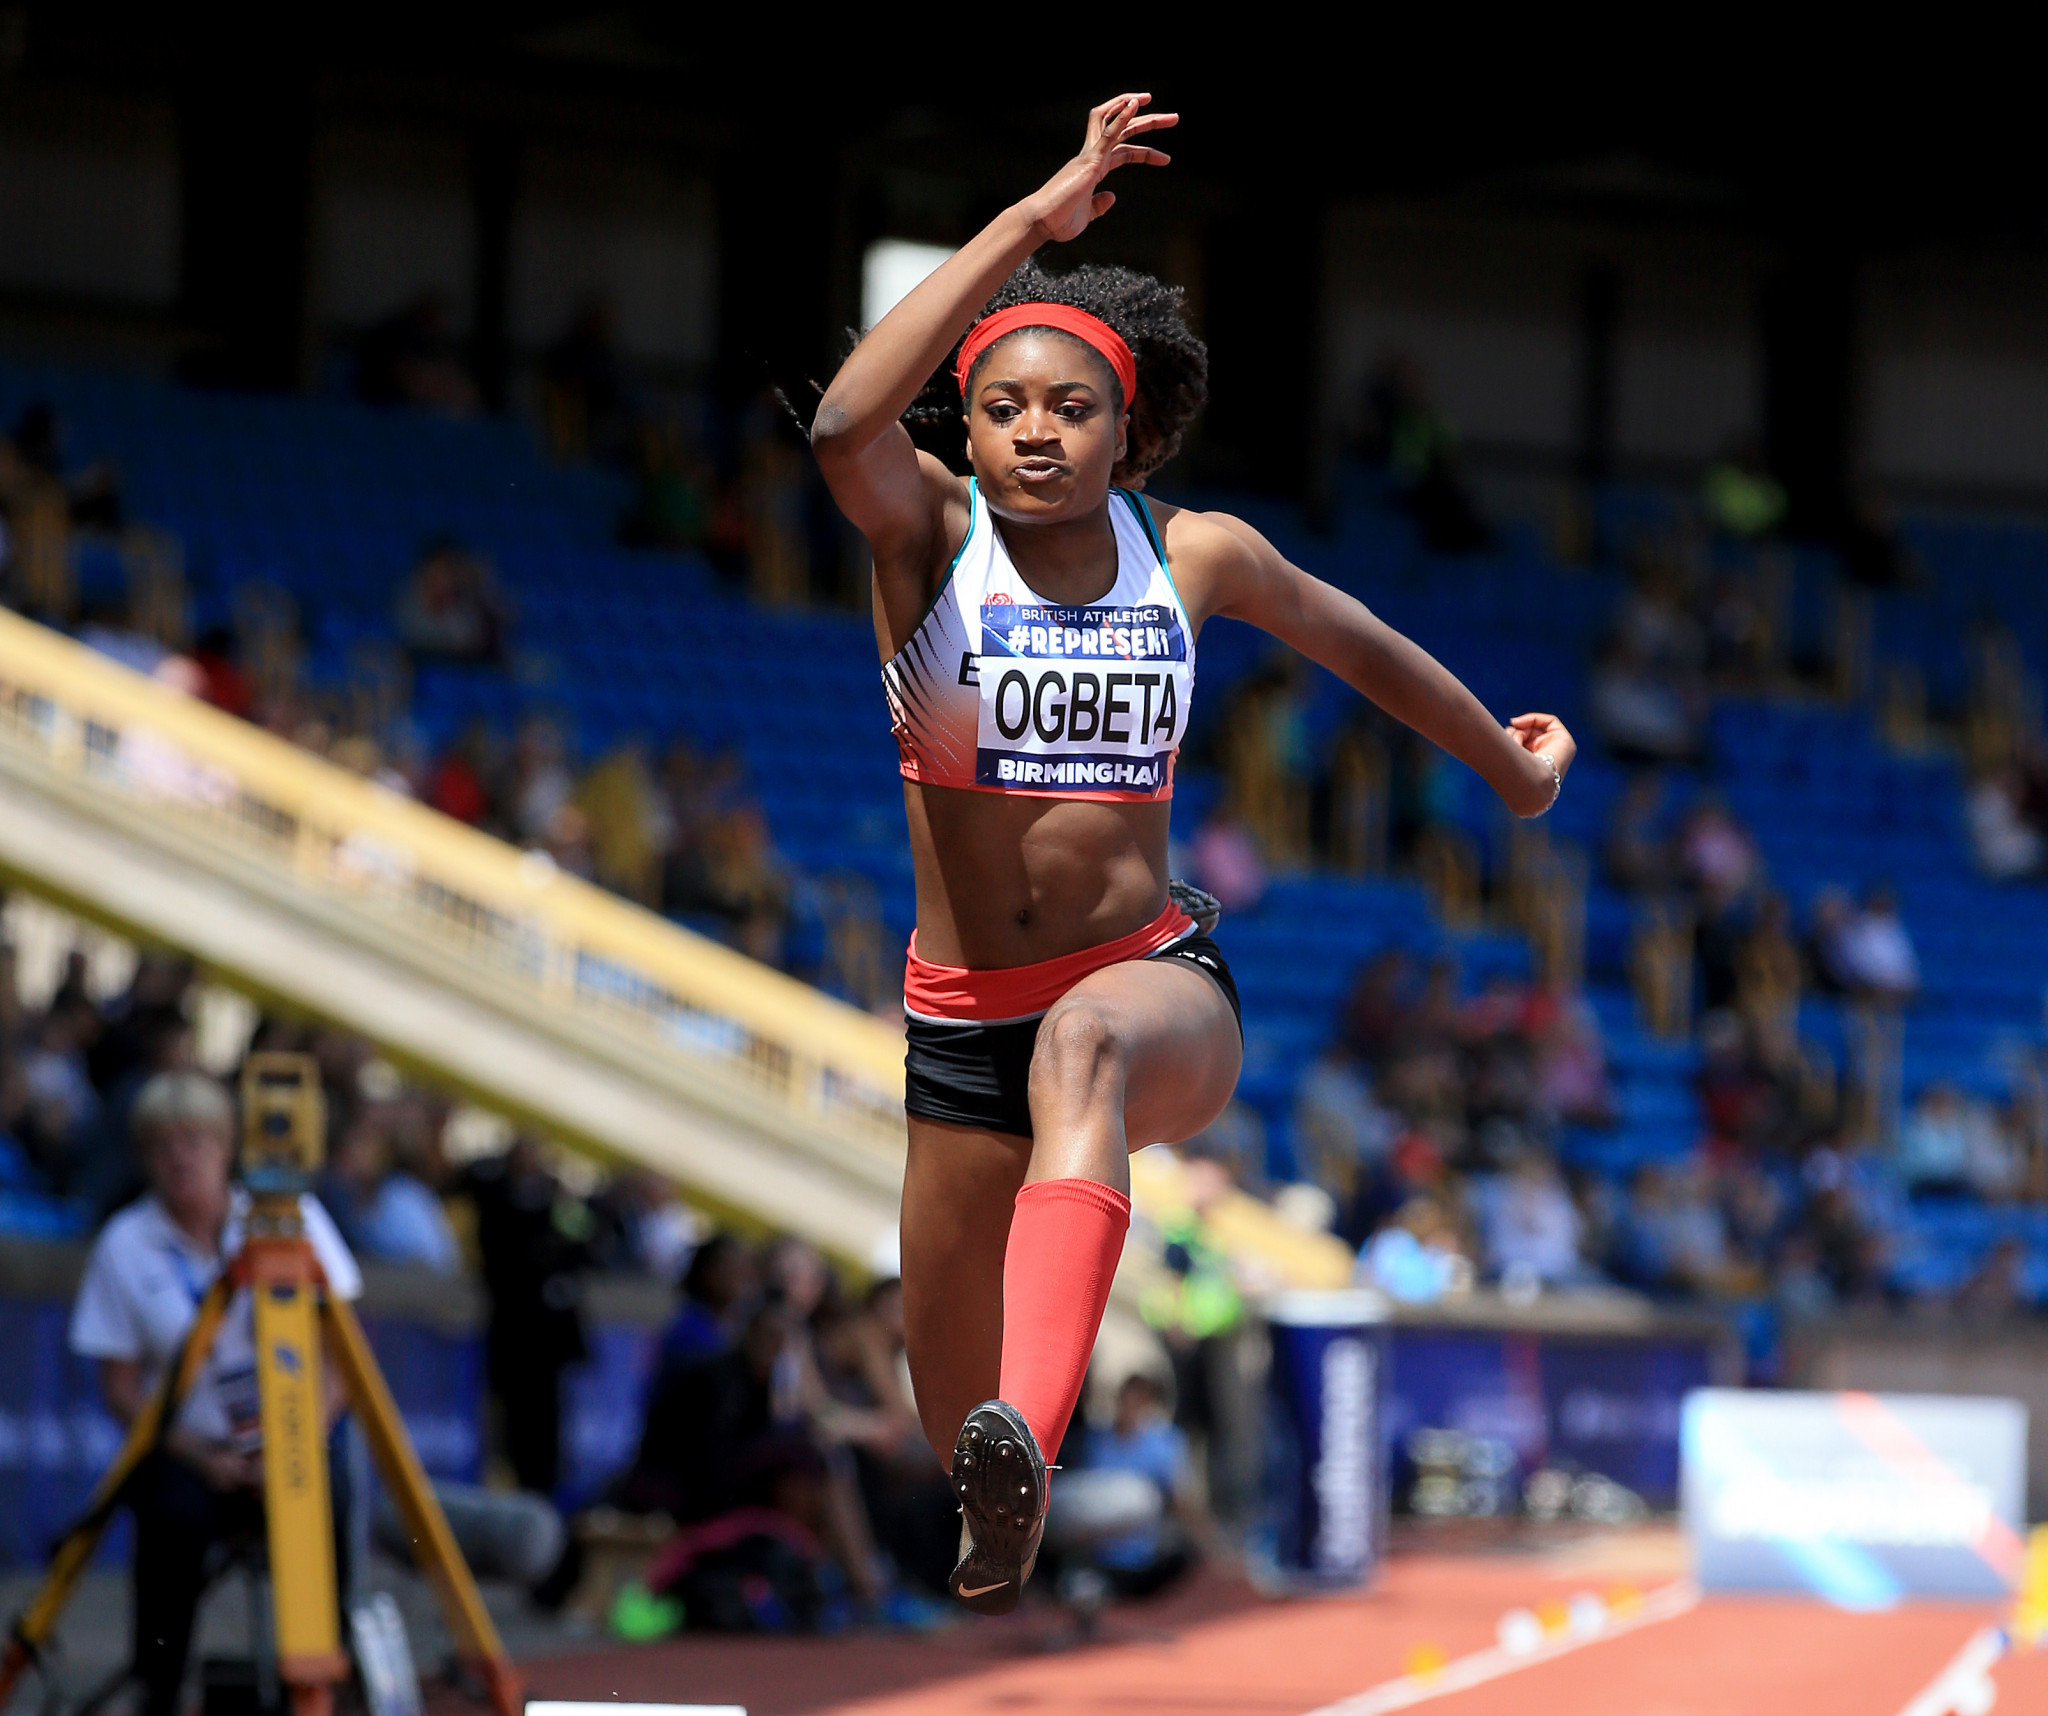 Naomi Ogbeta, British indoor triple jump champion, has helped promote entry to the Great Manchester Run ©Getty Images